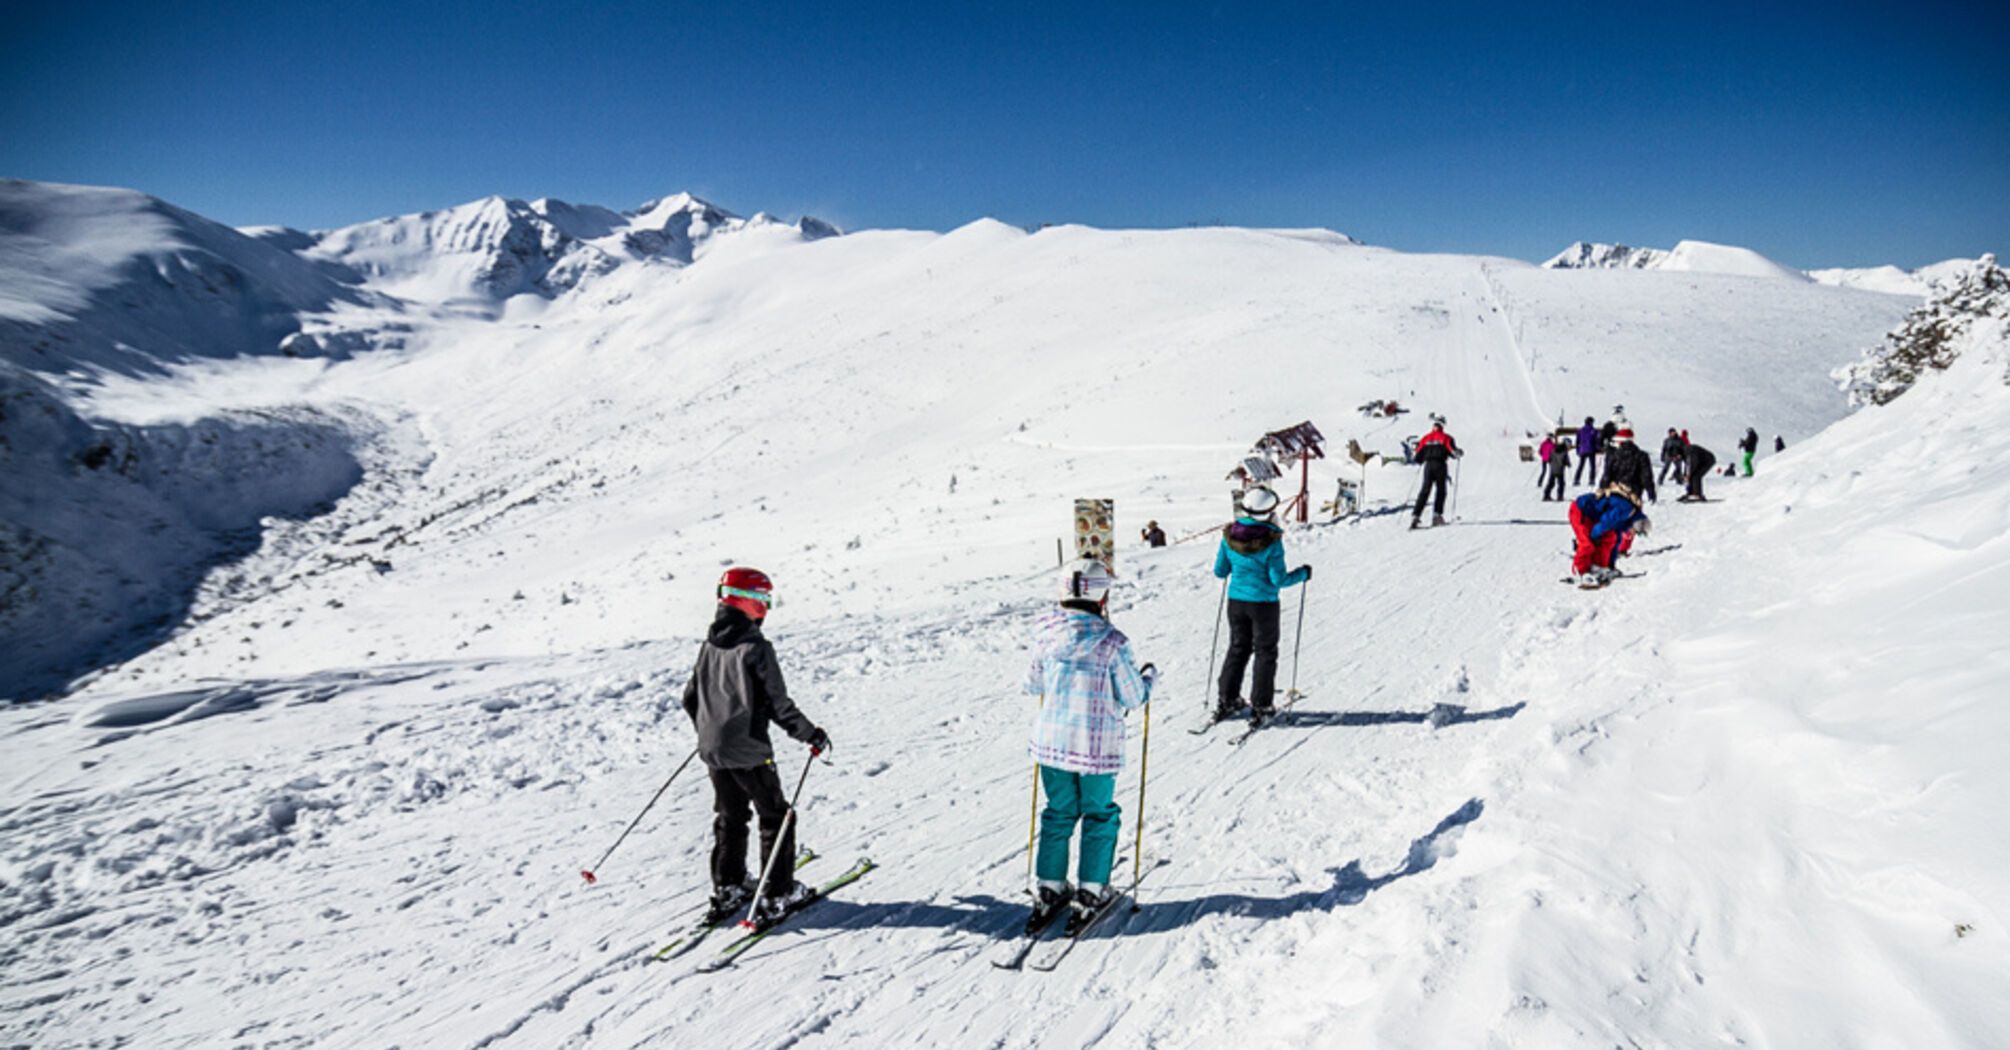 The cheapest and lesser-known ski resort in Europe, worth attention, has been named